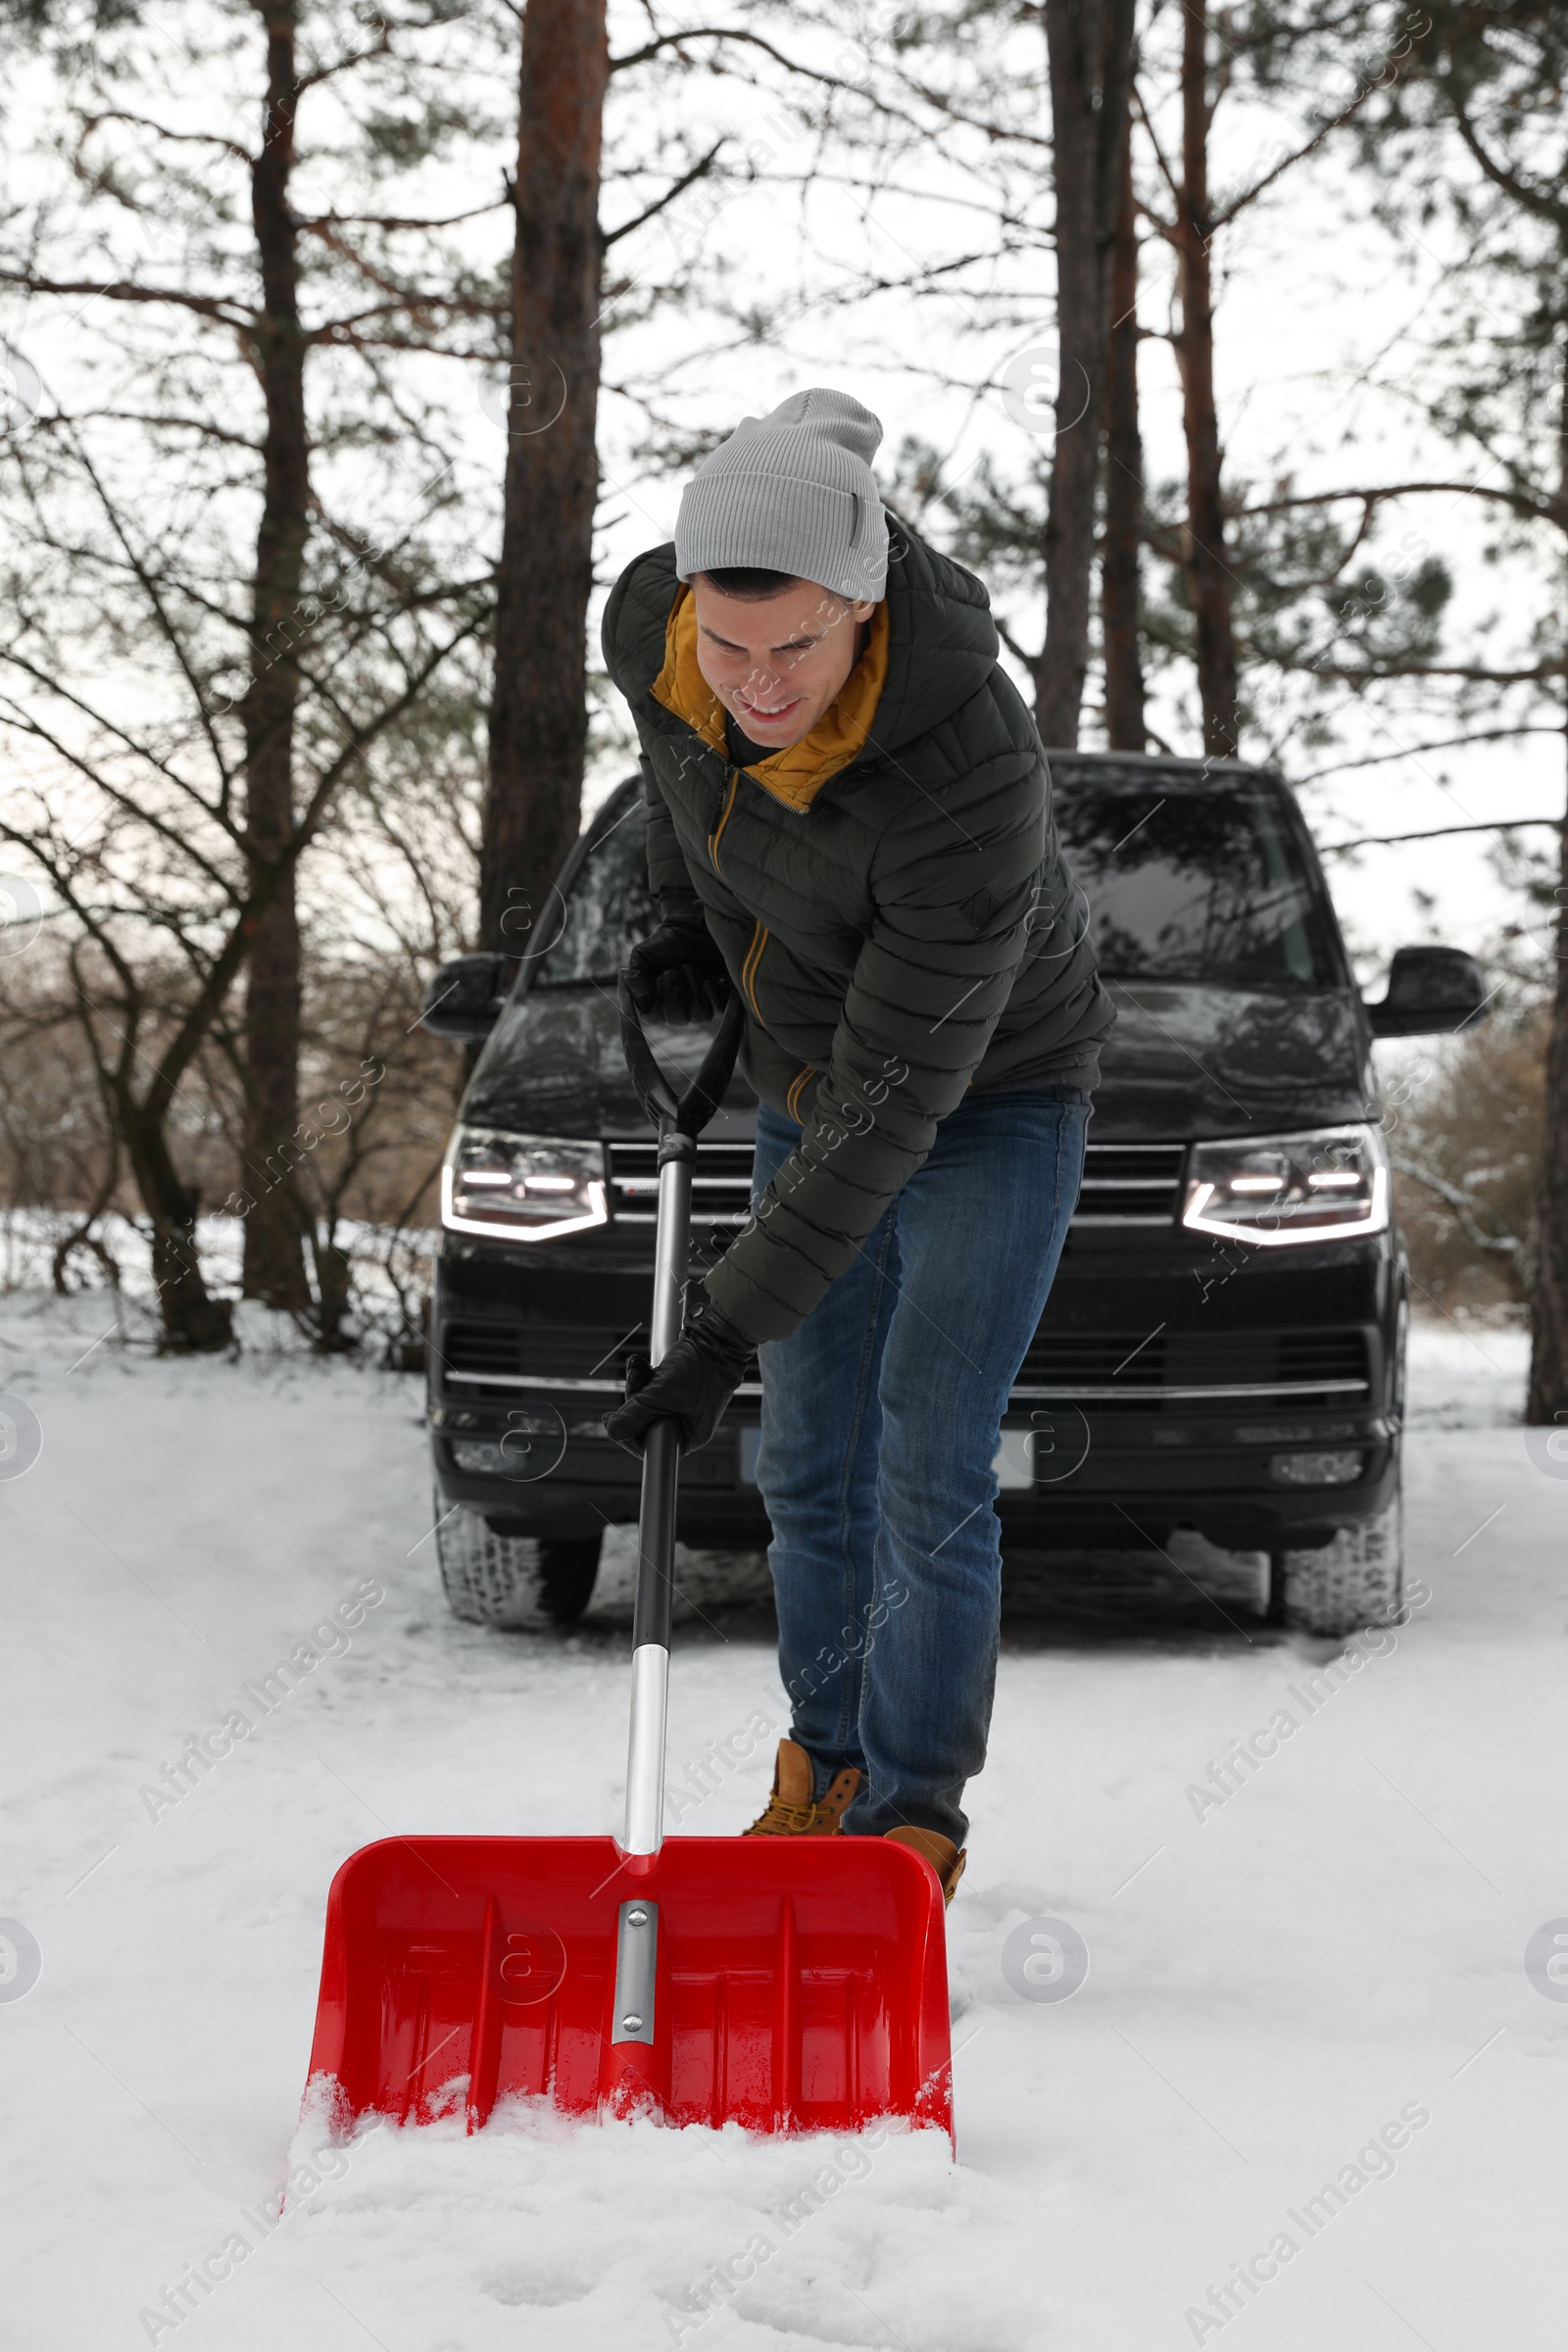 Photo of Man removing snow with shovel near car outdoors on winter day